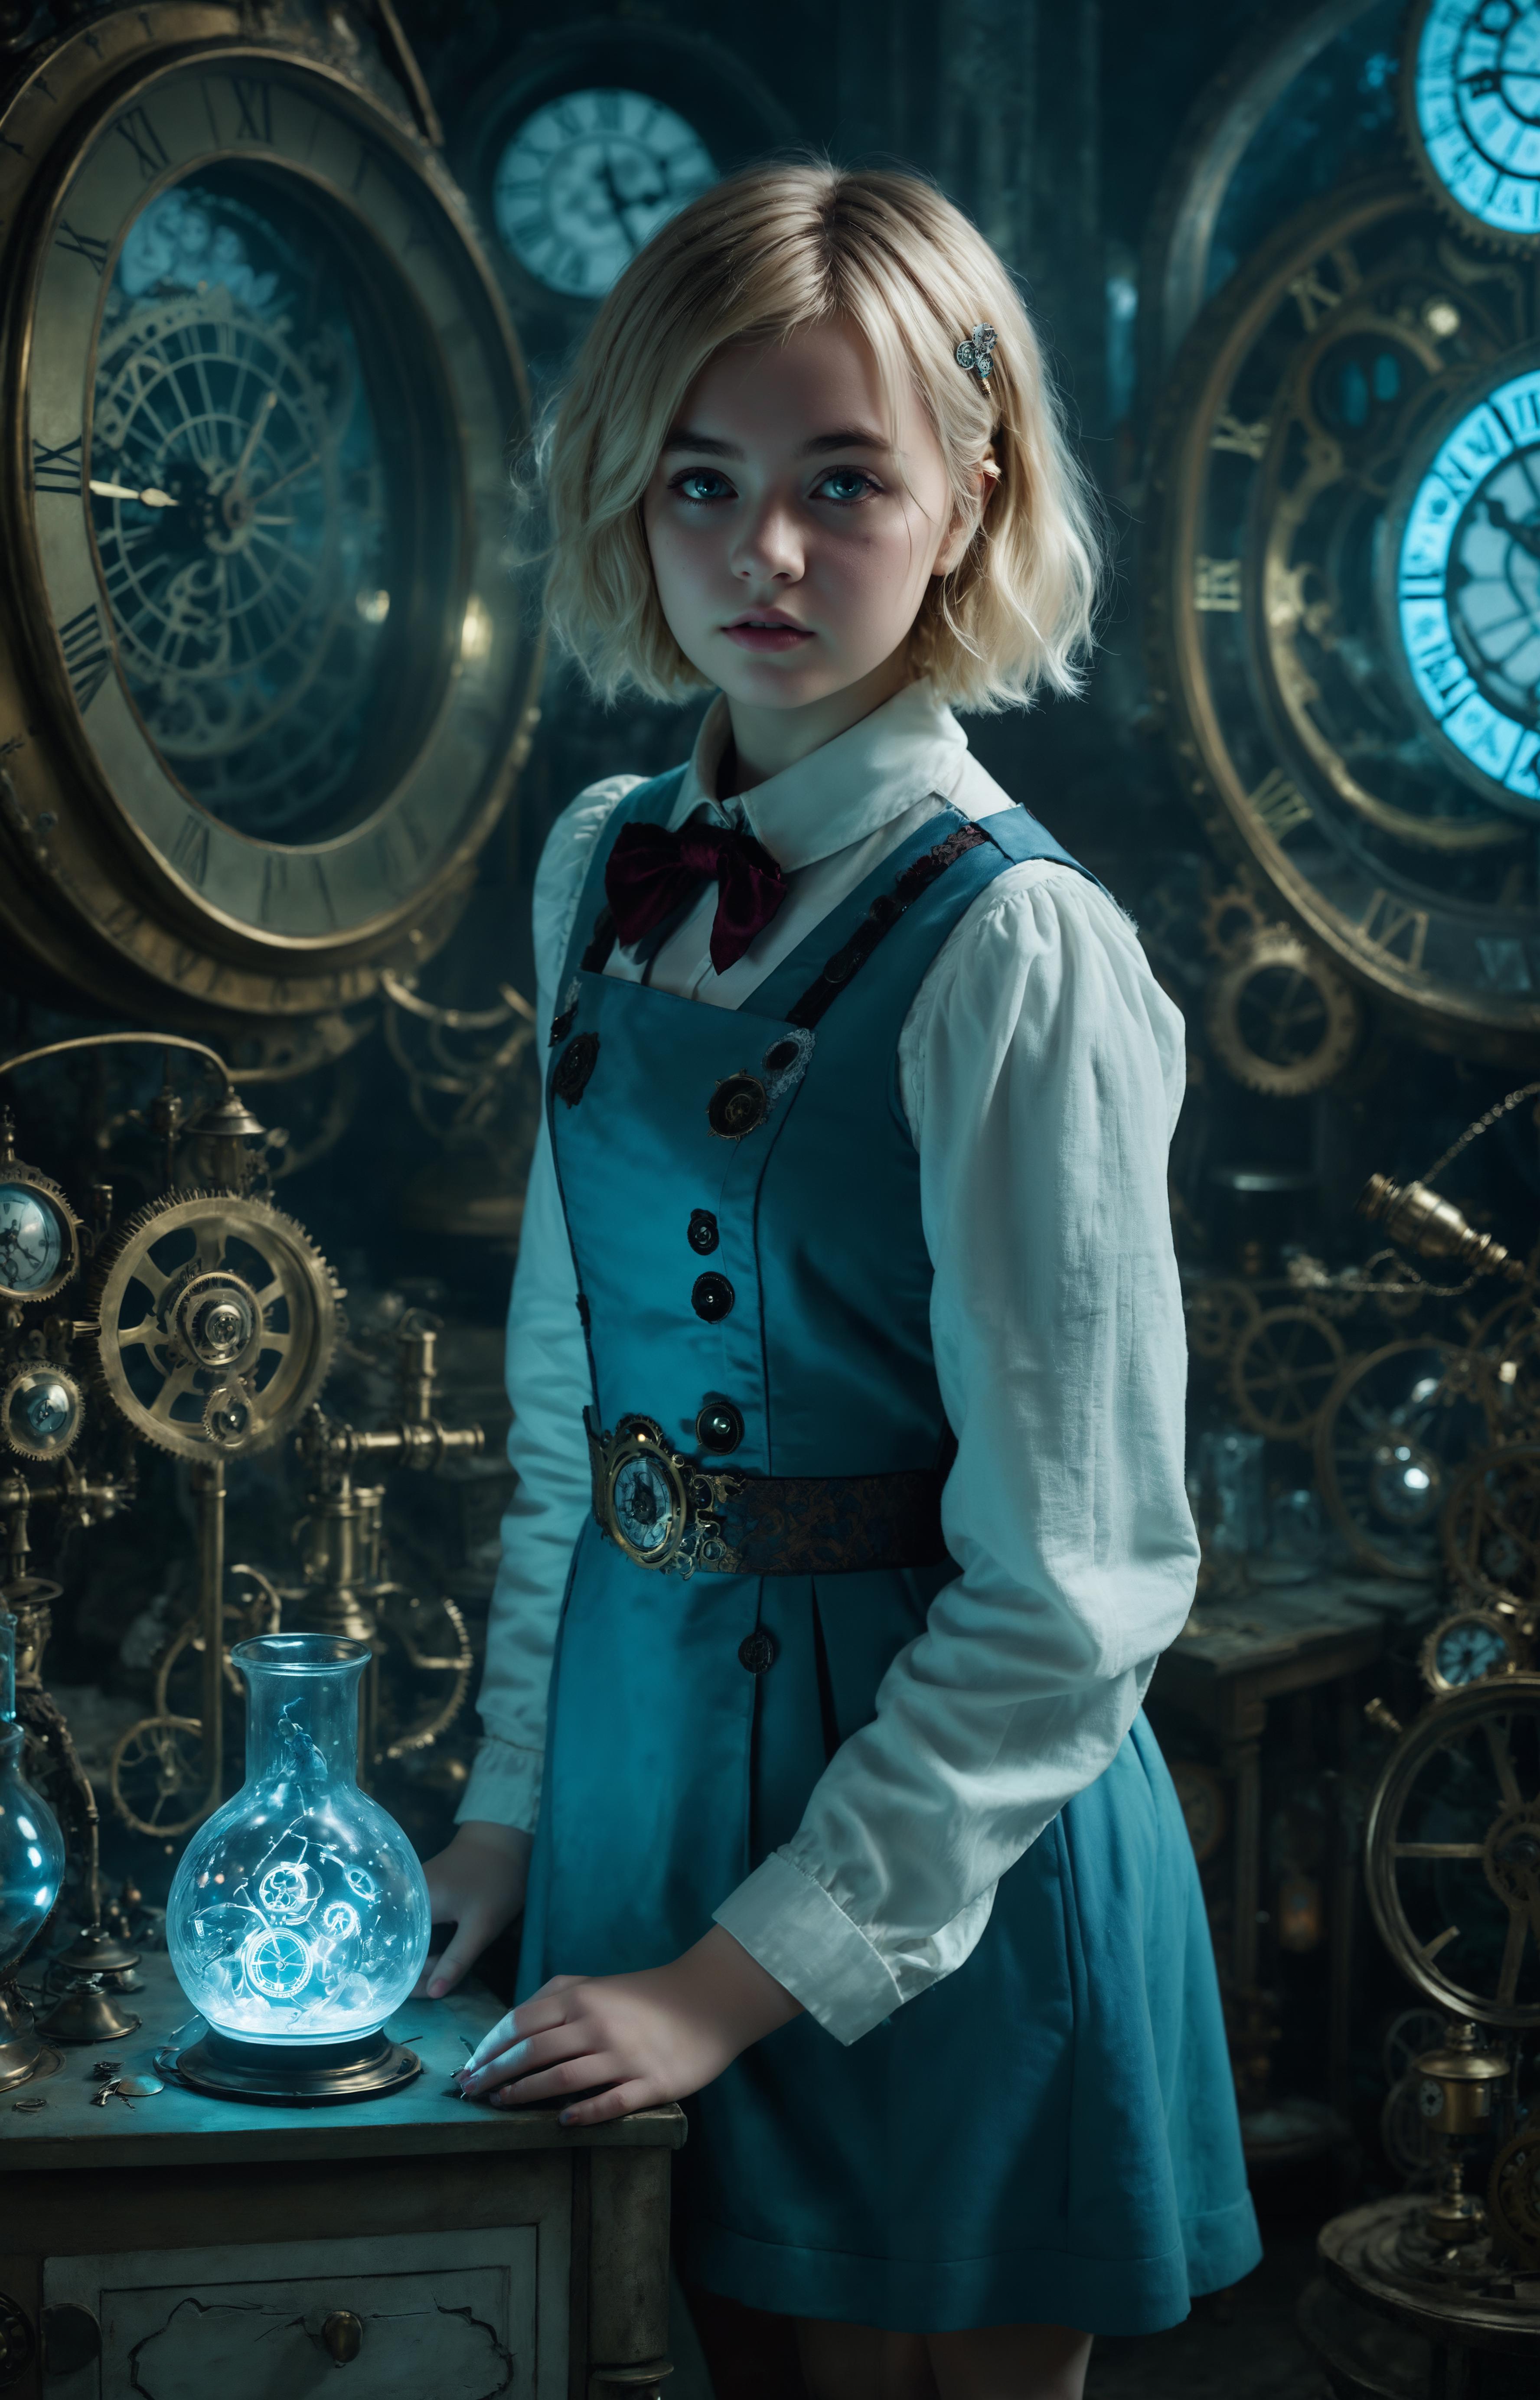 Girl in a blue dress and white shirt standing in front of a clock.